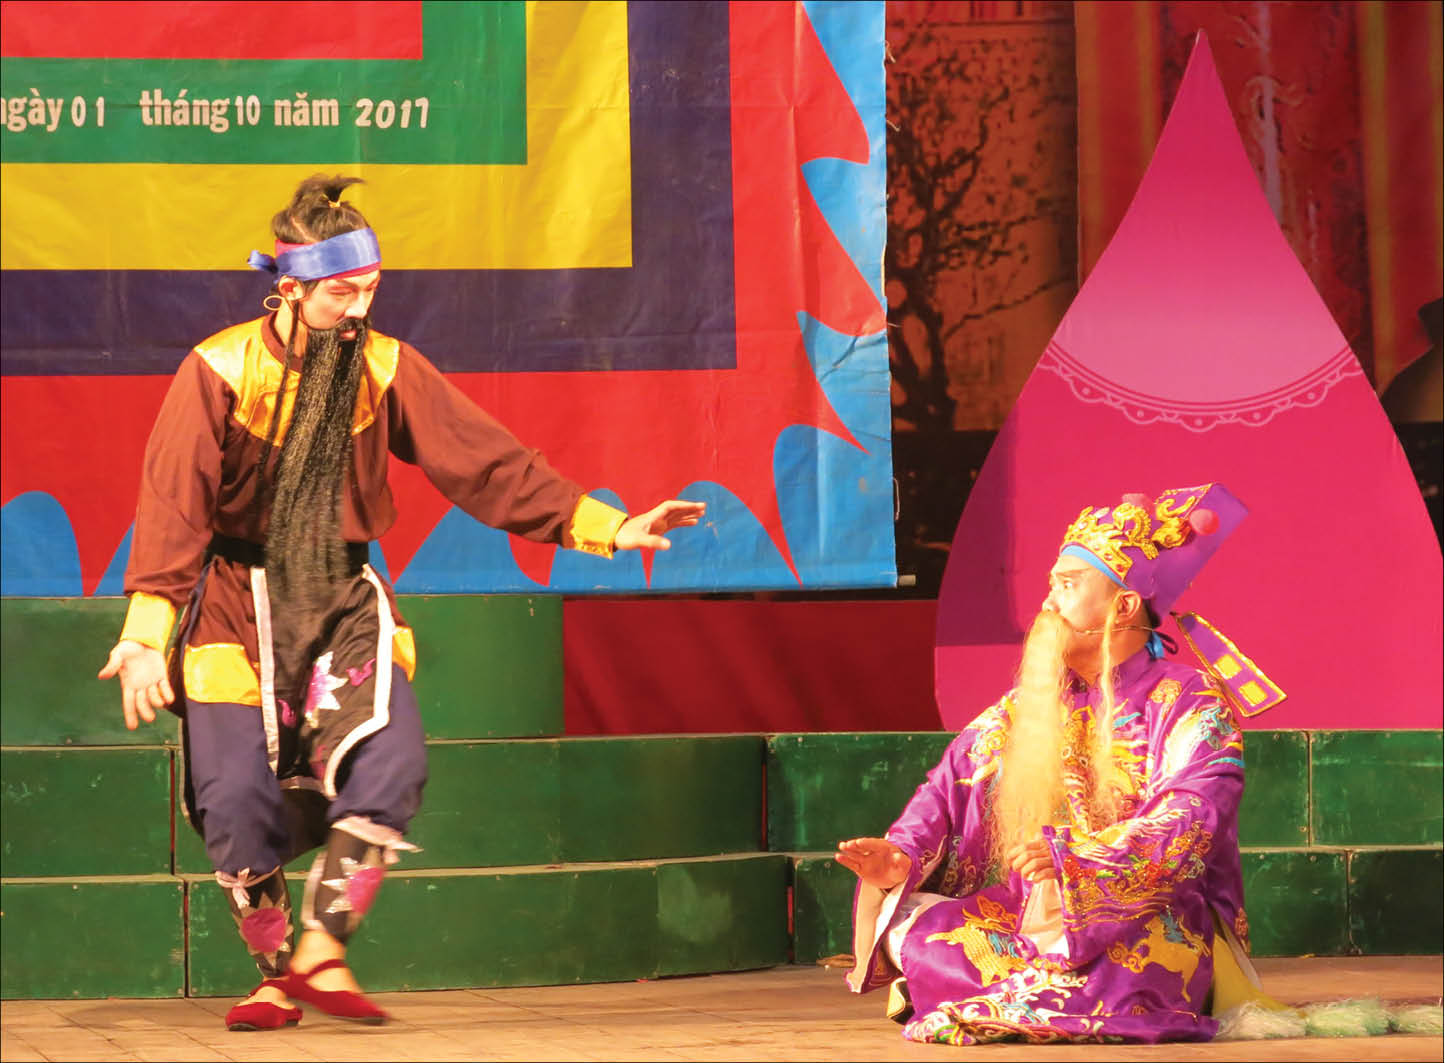 Hat tuong, the traditional opera of Central Vietnam